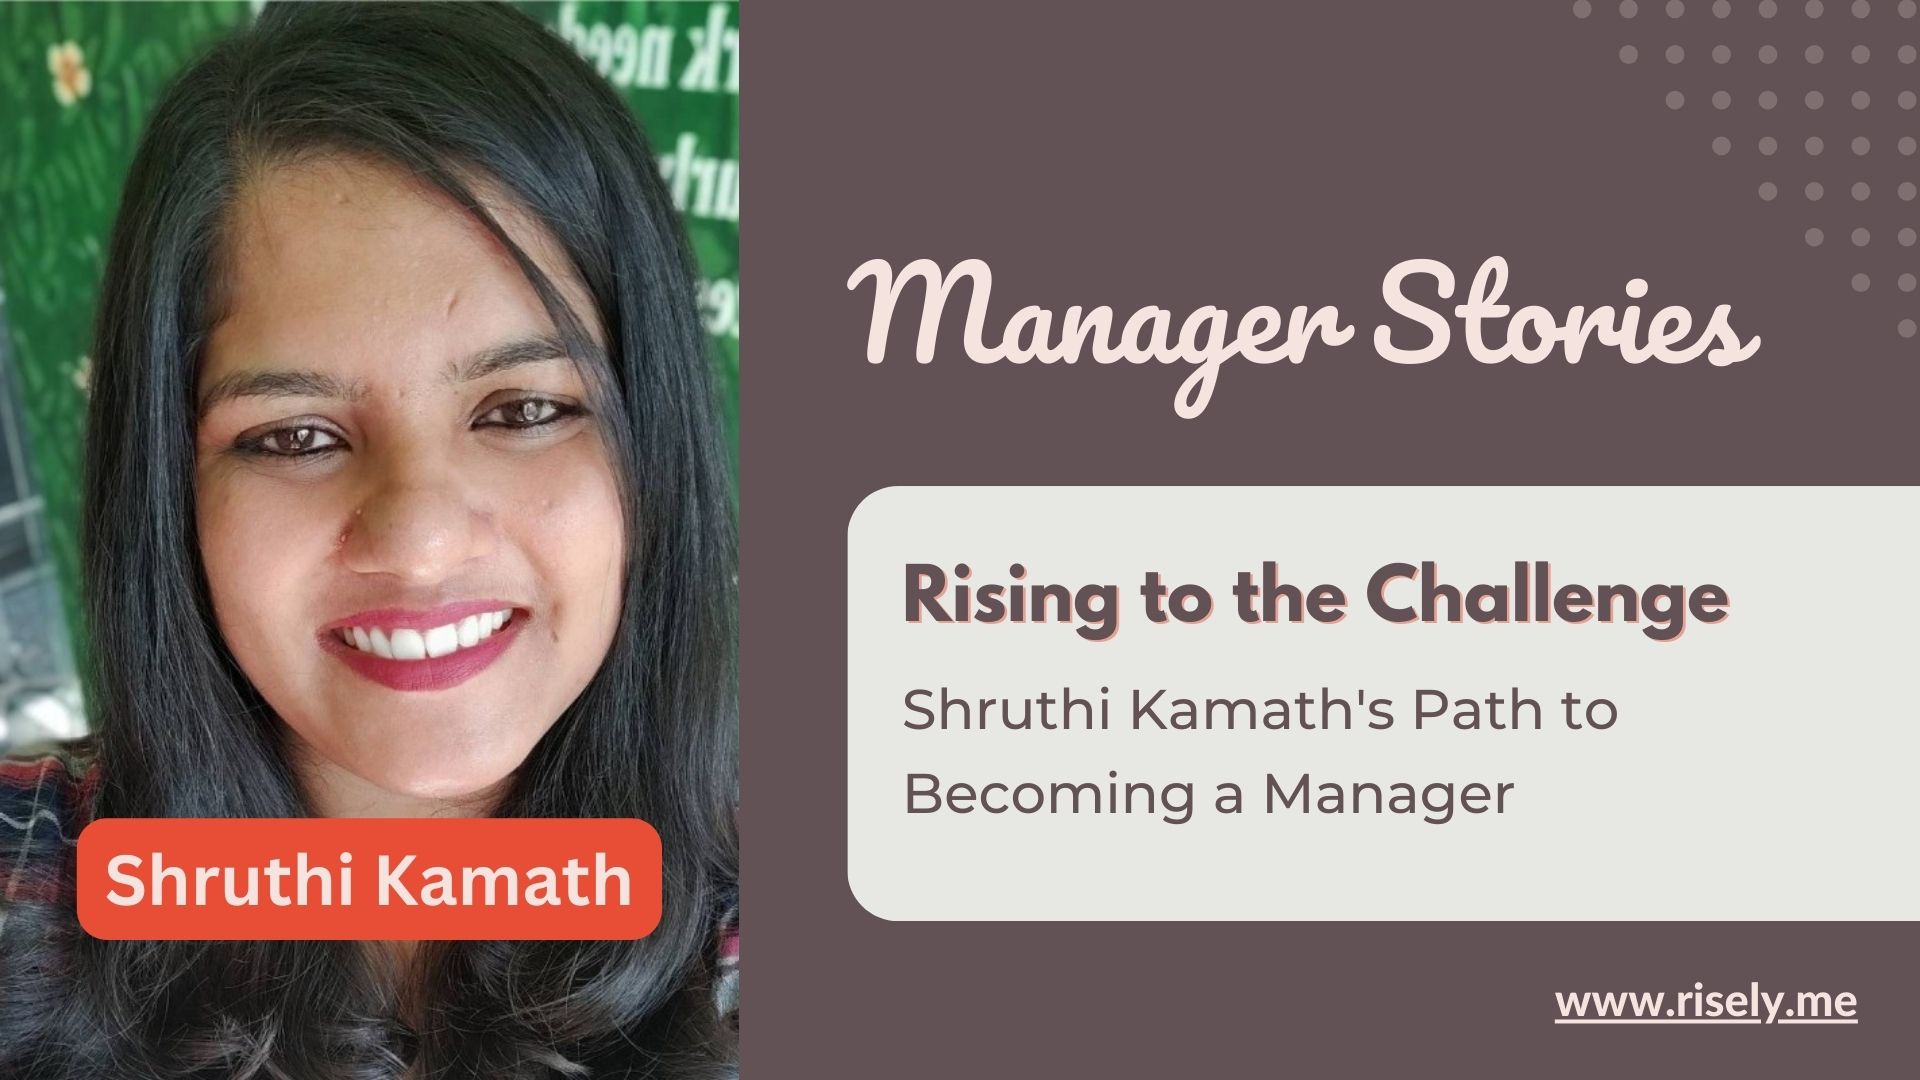 Rising to the Challenge: Shruthi Kamath’s Path to Becoming a Manager